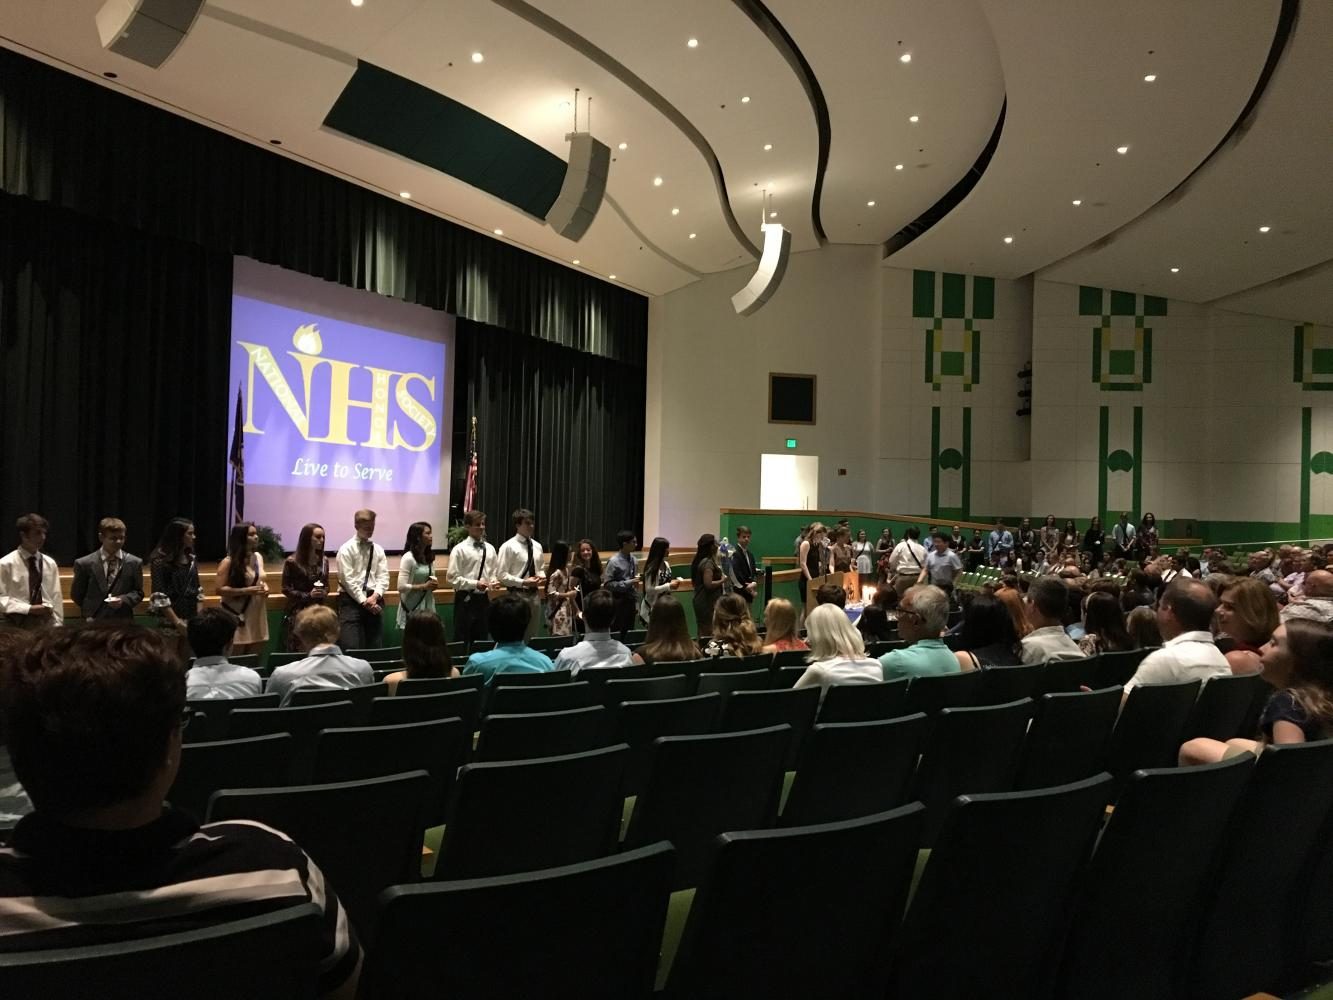 New NHS inductees, parents, and teachers gathered in the auditorium on the night of April 27 for the induction ceremony. 